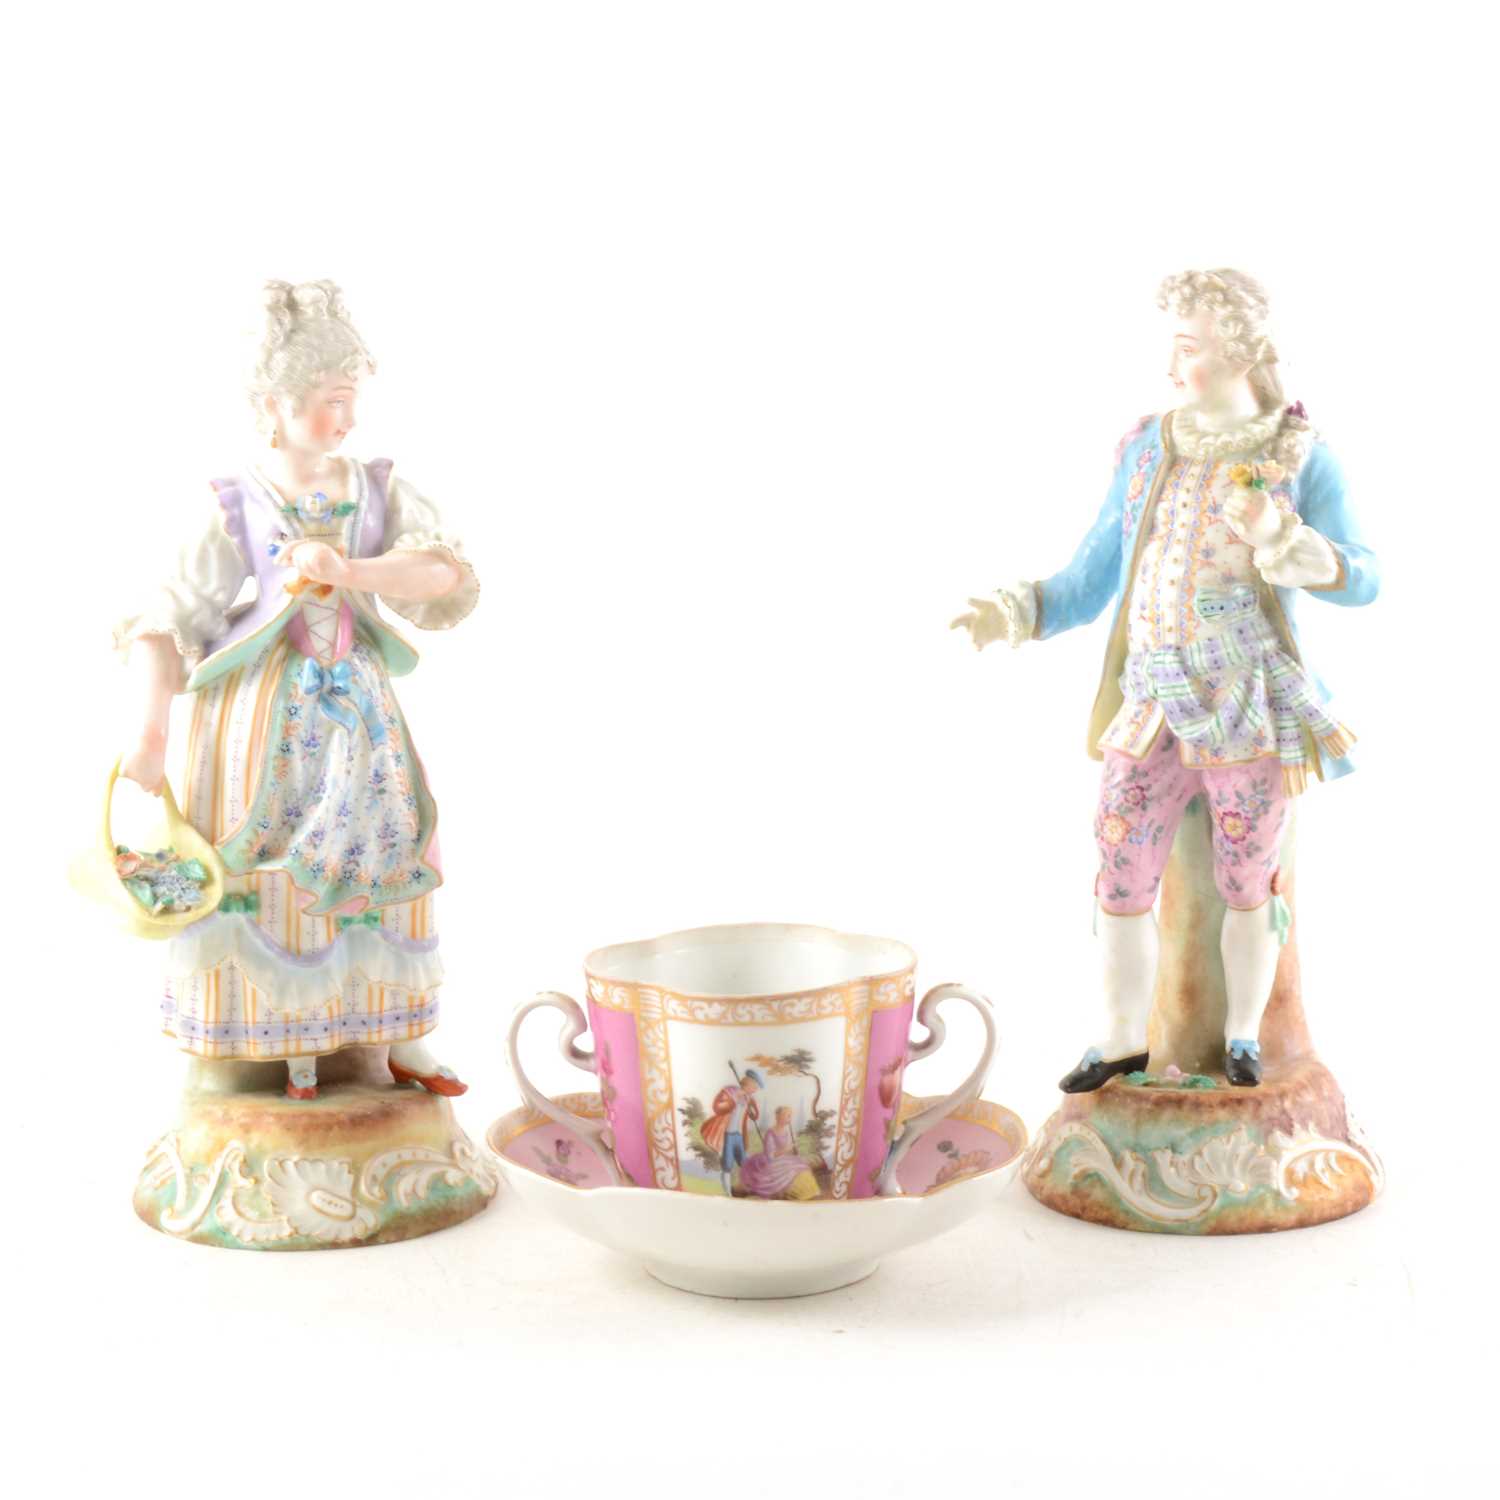 Lot 101 - A Pair of German porcelain figures, and a Dresden cup and saucer.